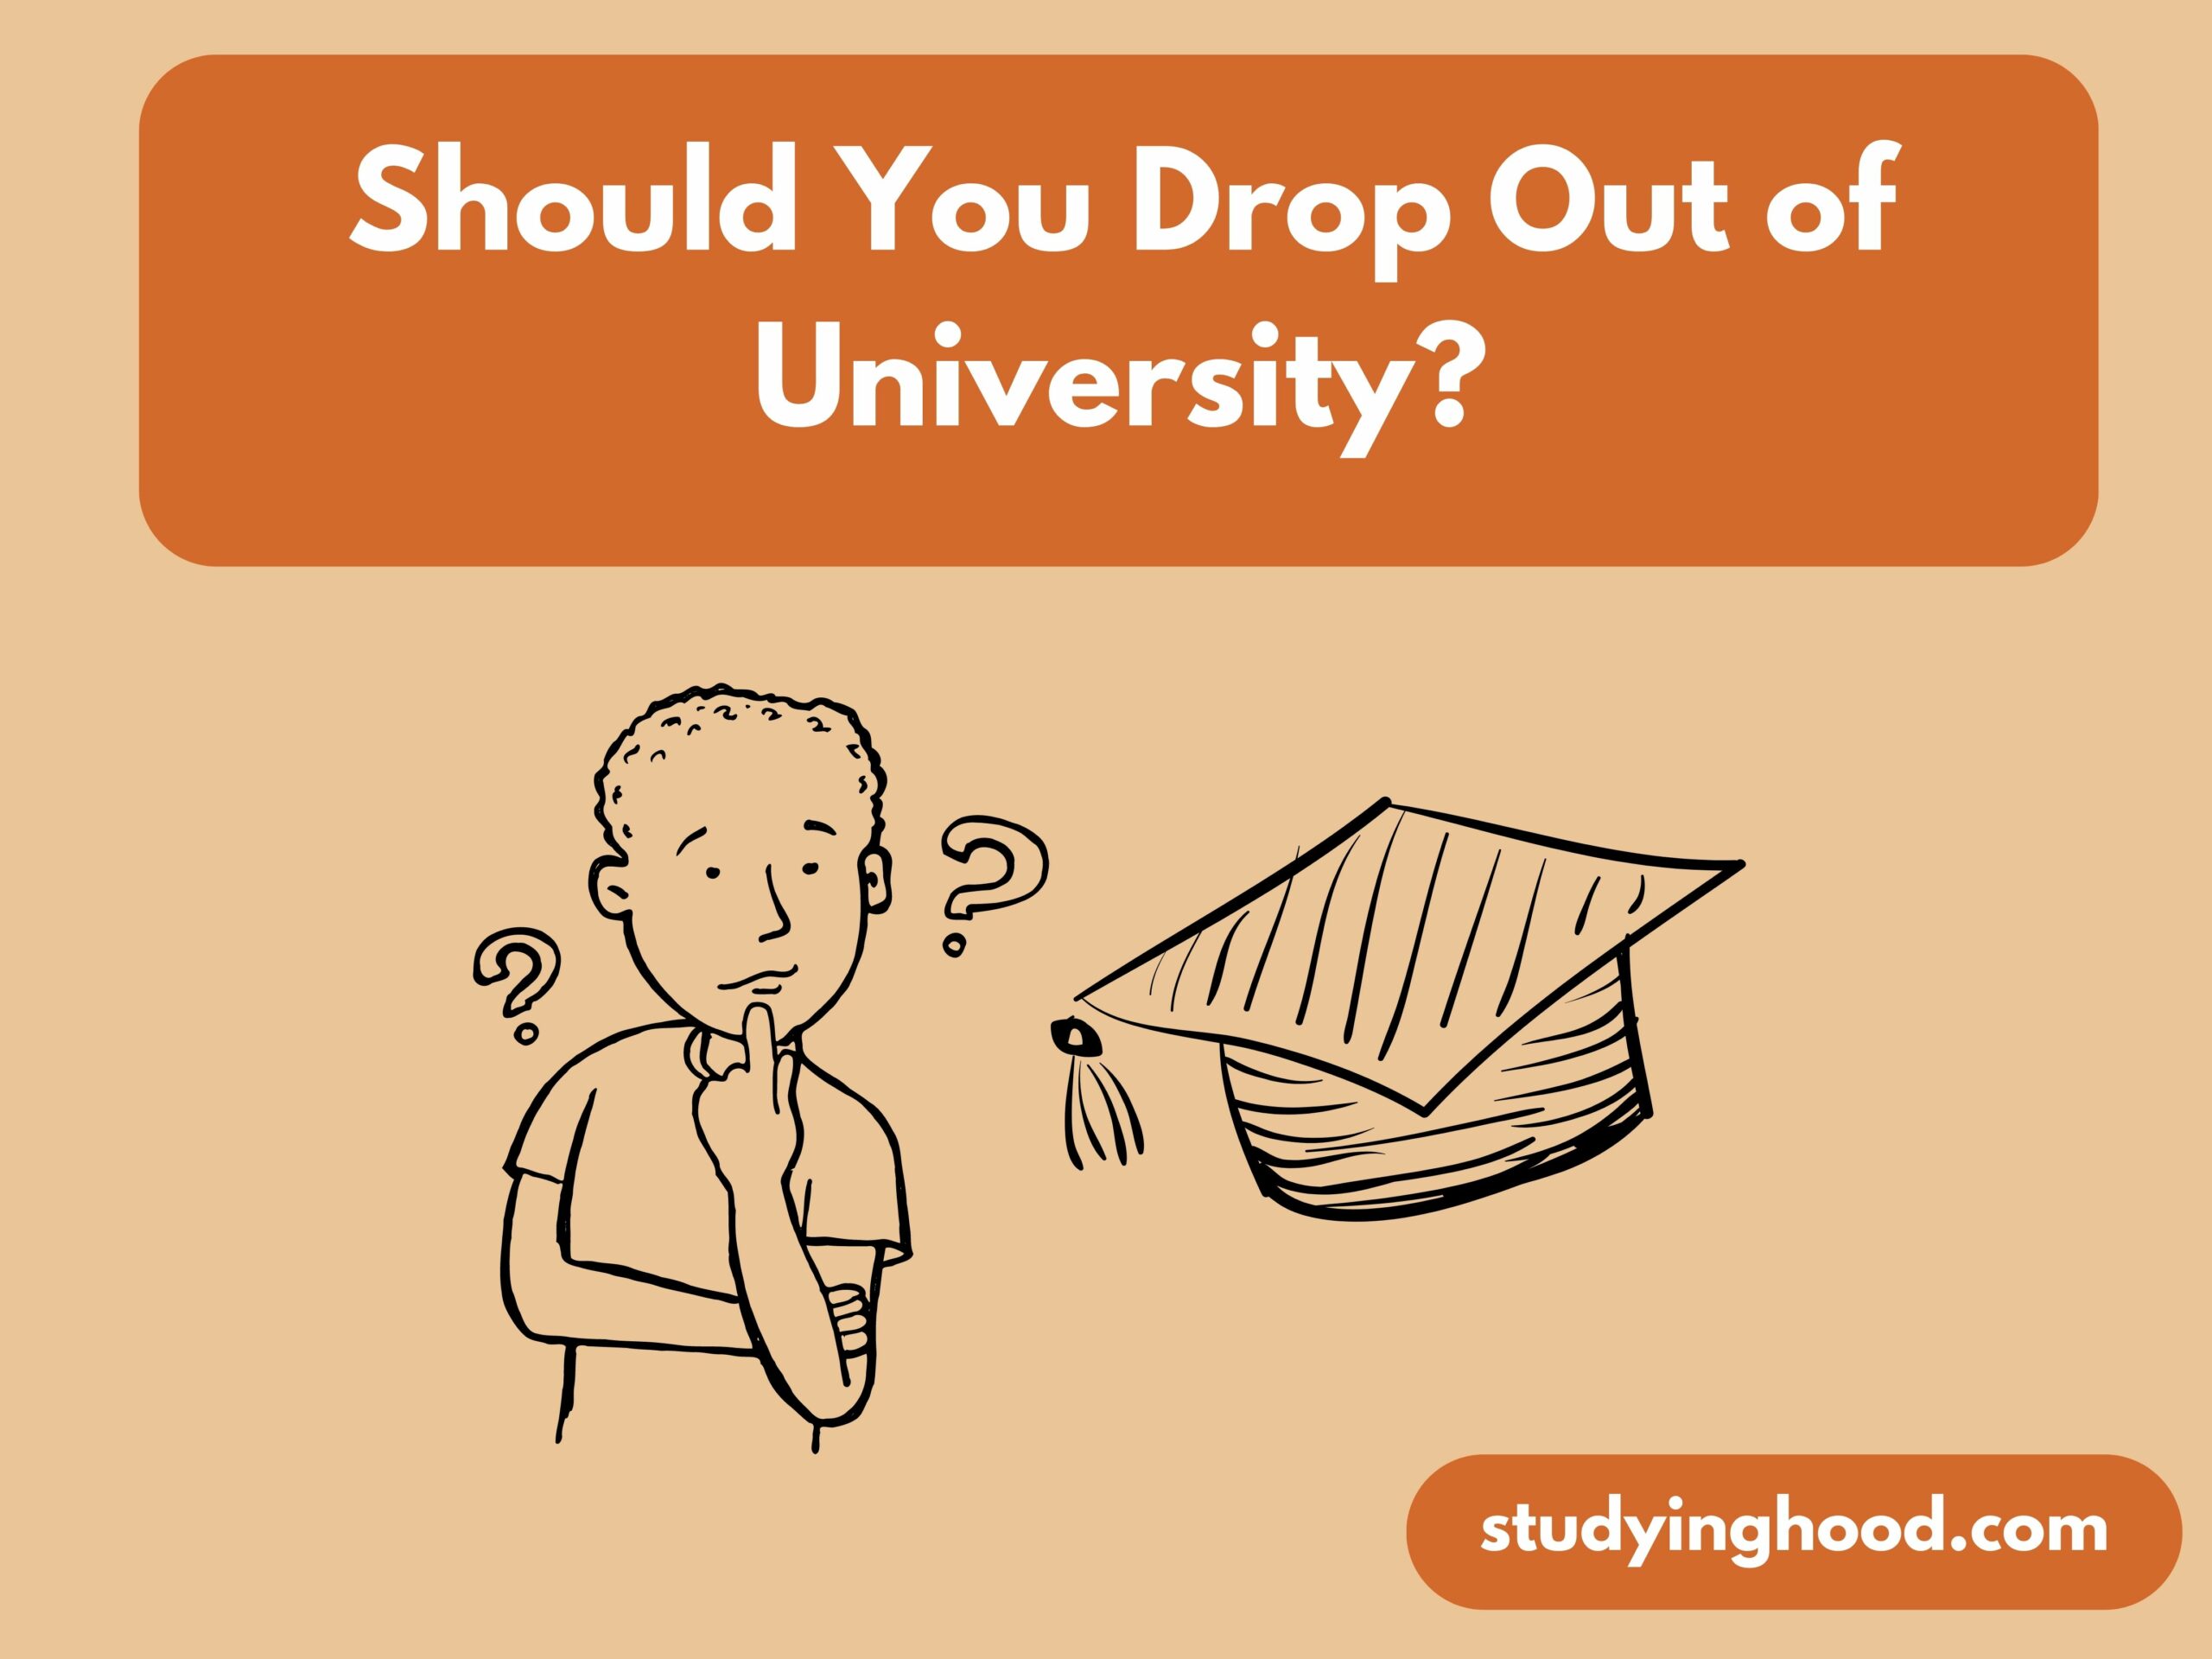 Should You Drop Out of University?